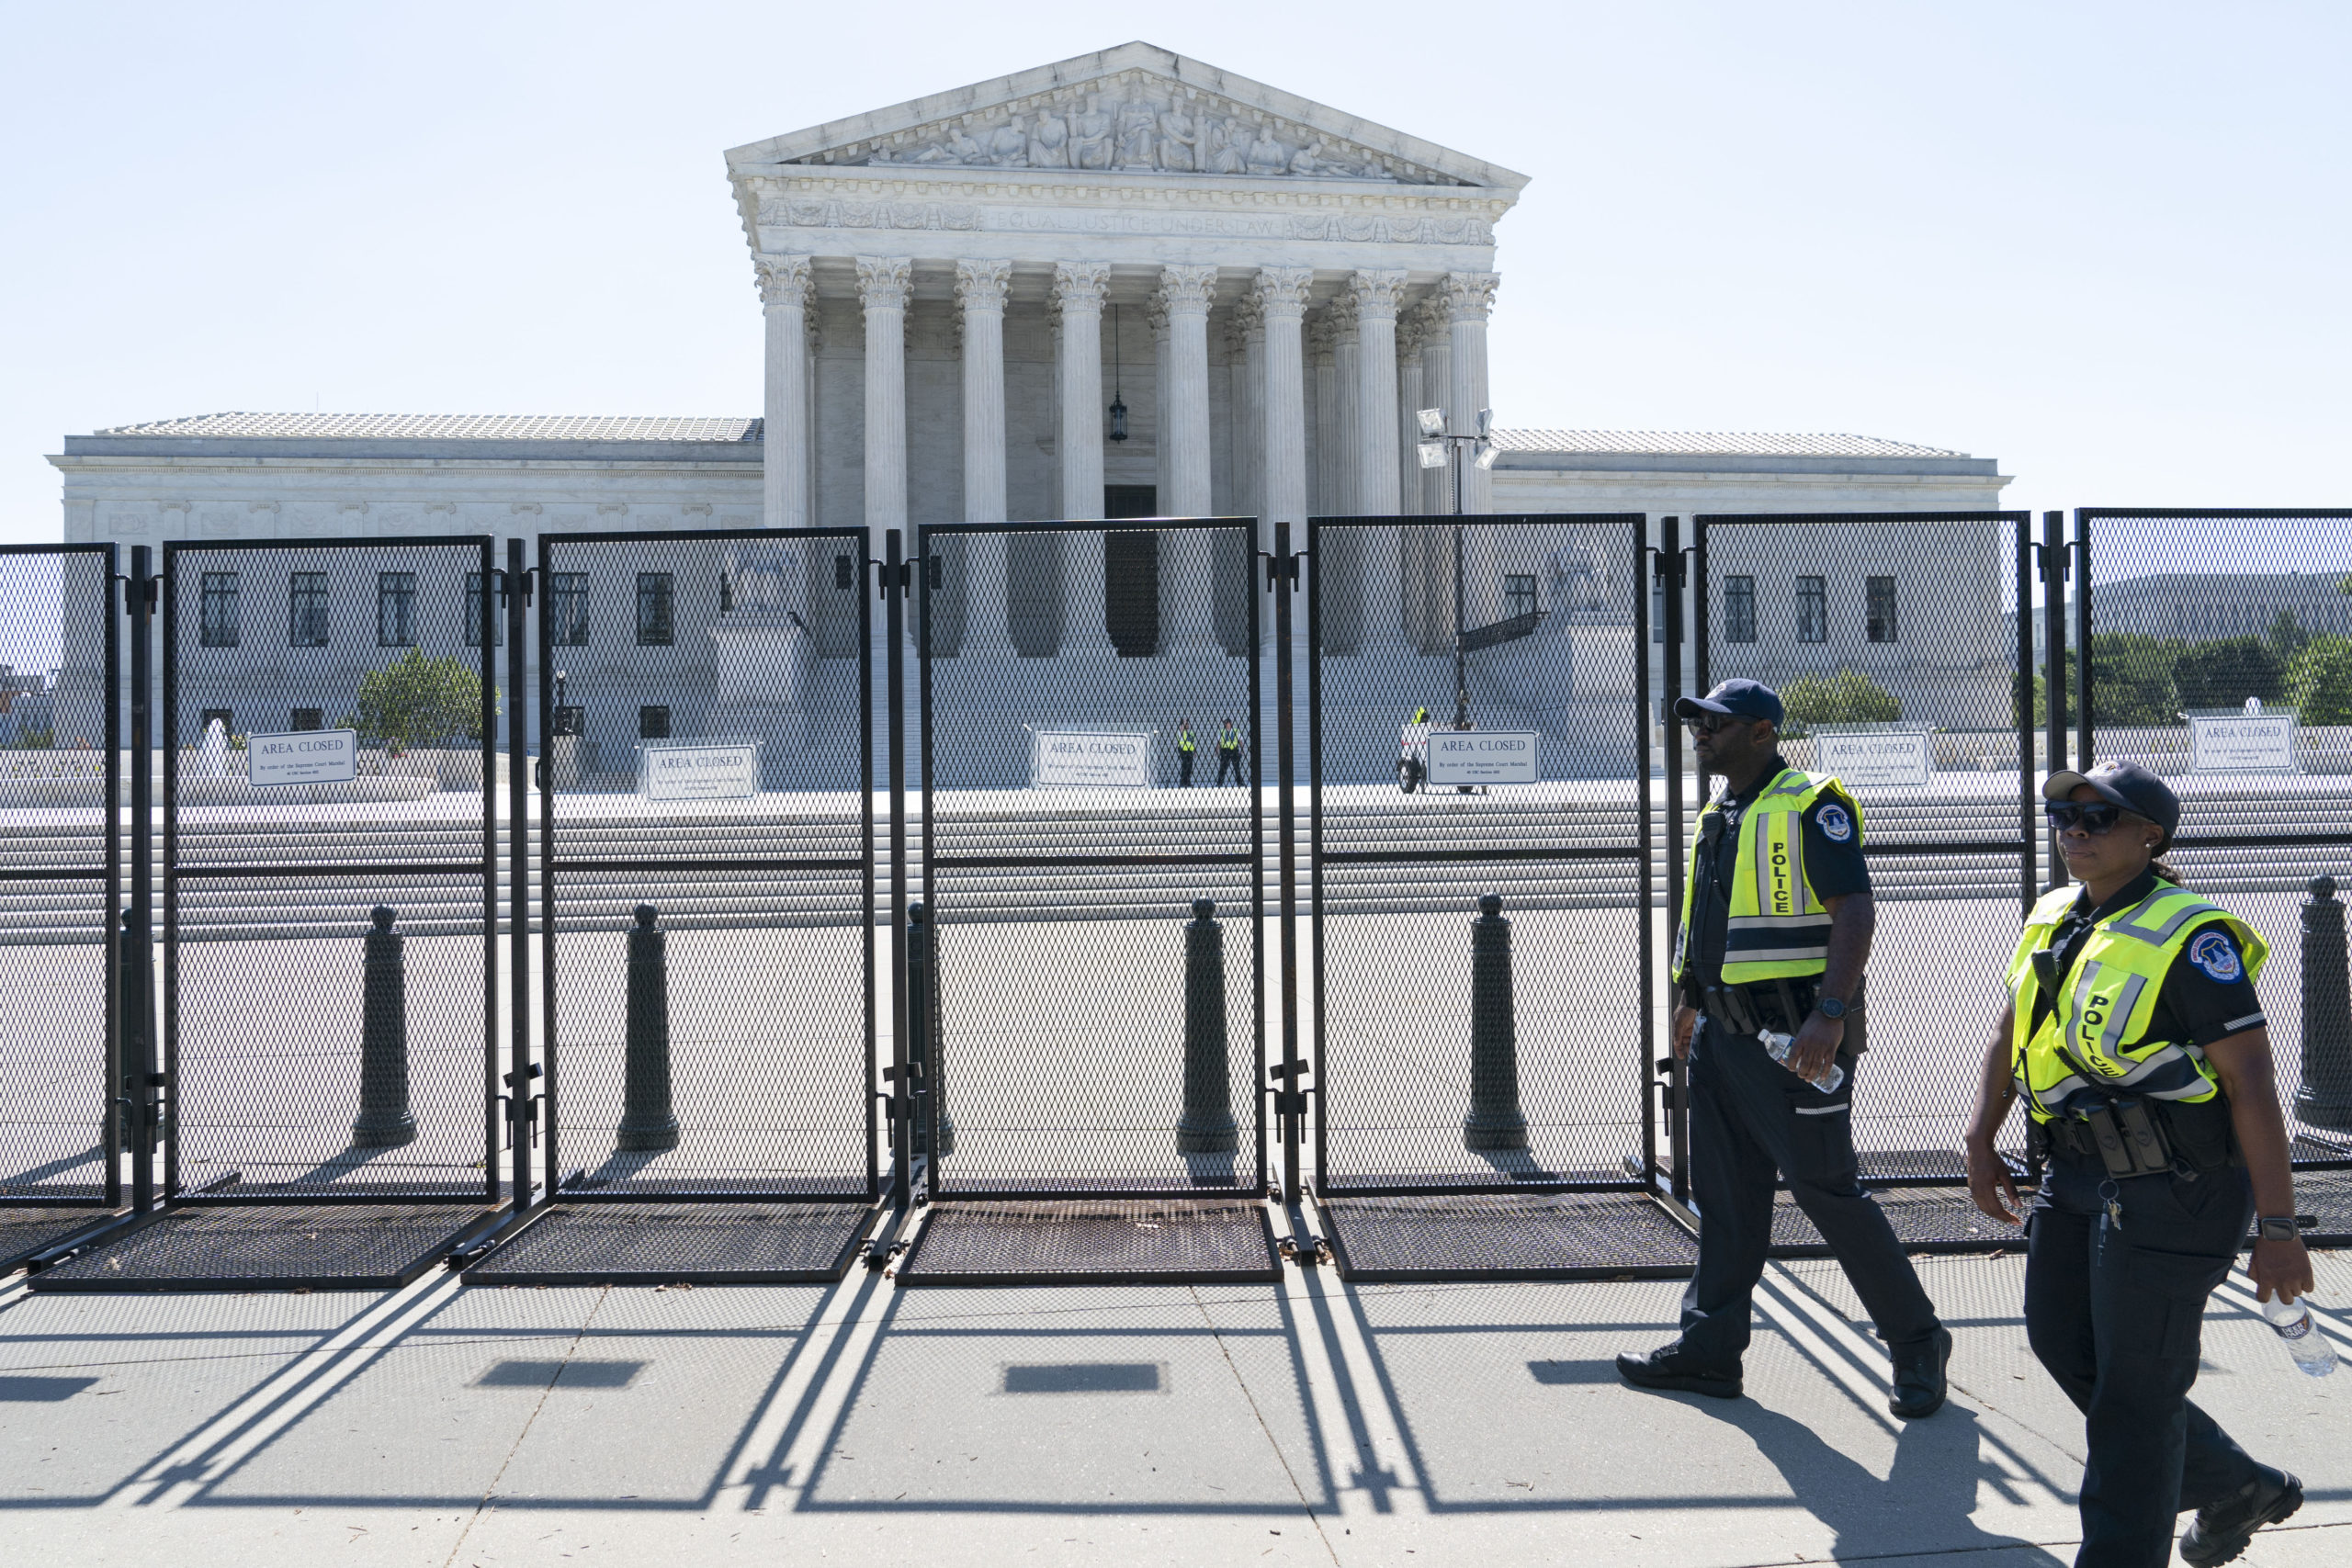 Security officers patrol outside of the Supreme Court, Thursday in Washington.